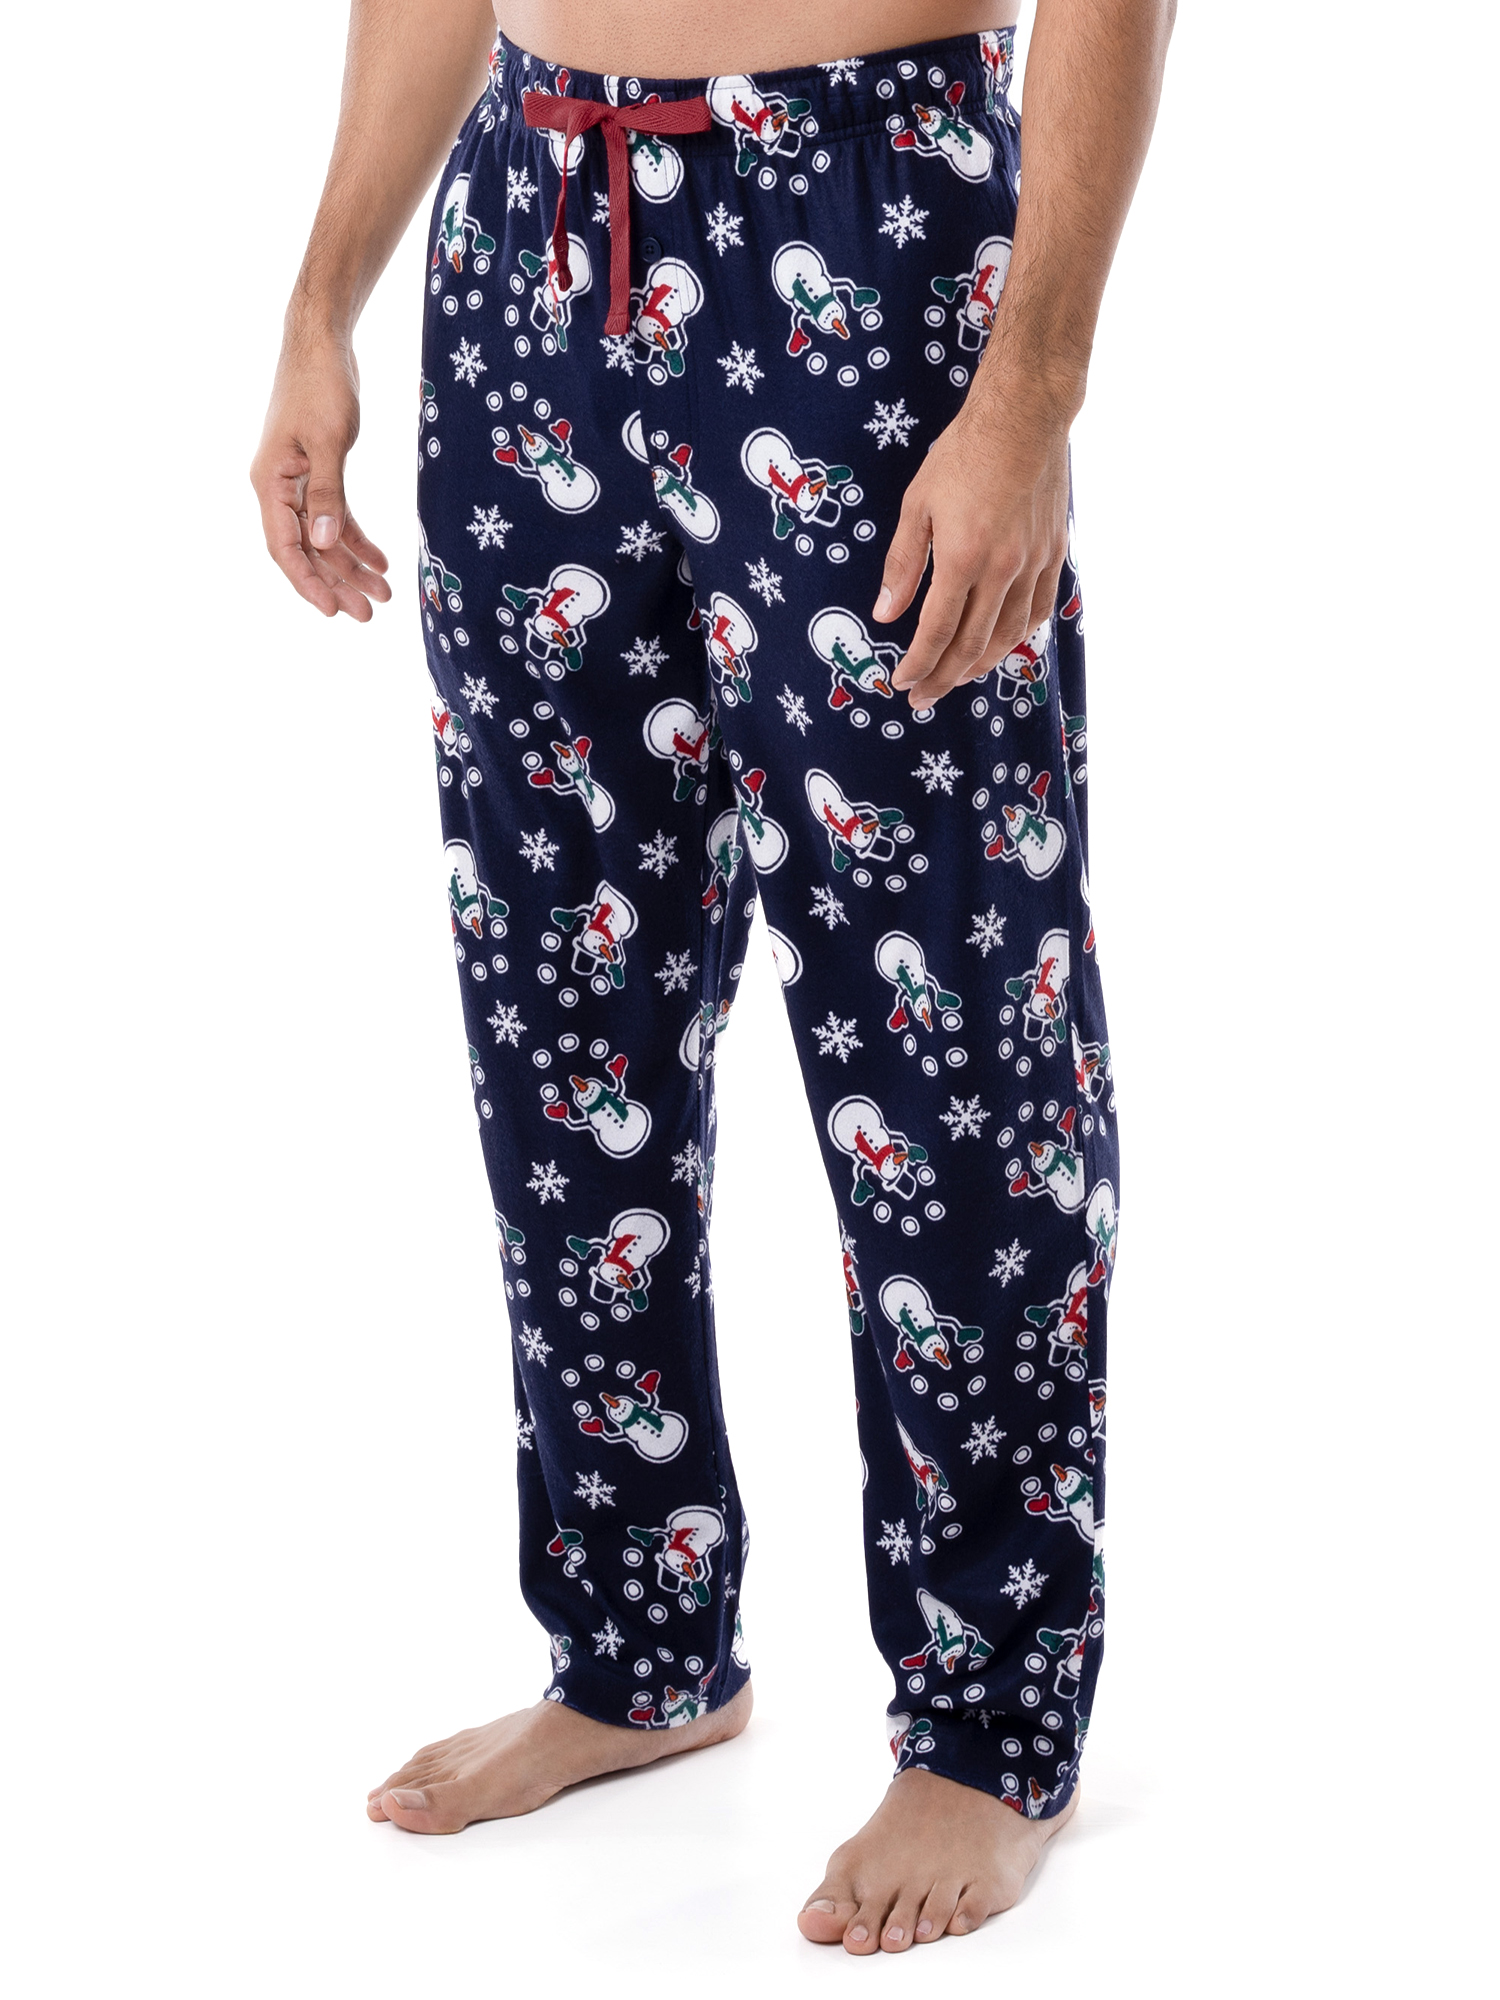 Fruit of the Loom Men's Holiday and Plaid Print Soft Microfleece Pajama Pant 2-Pack Bundle - image 7 of 15